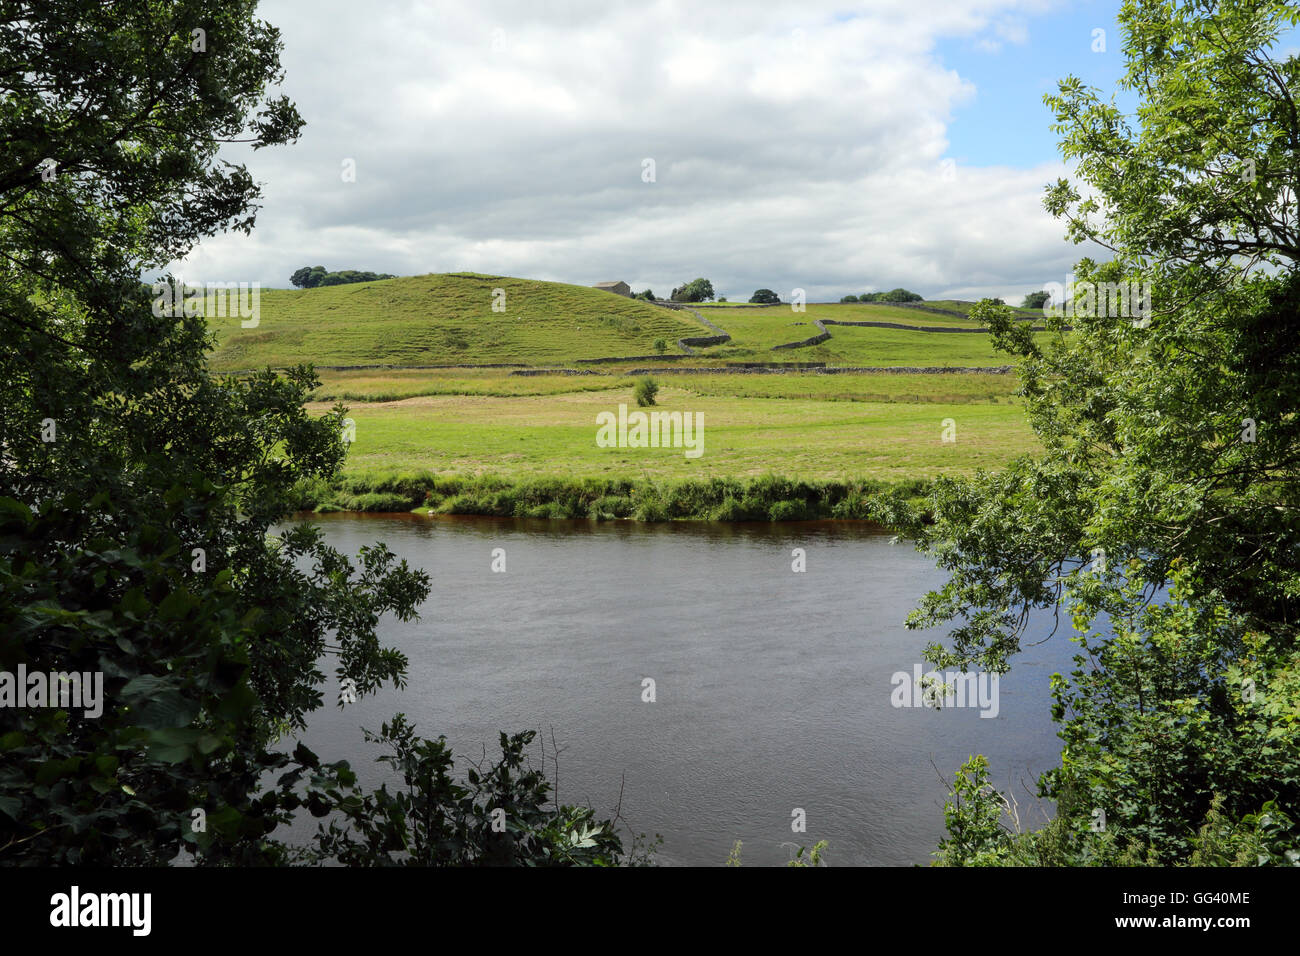 View from Dales Way along River Wharfe between Linton Falls and Burnsall, North Yorkshire, England Stock Photo